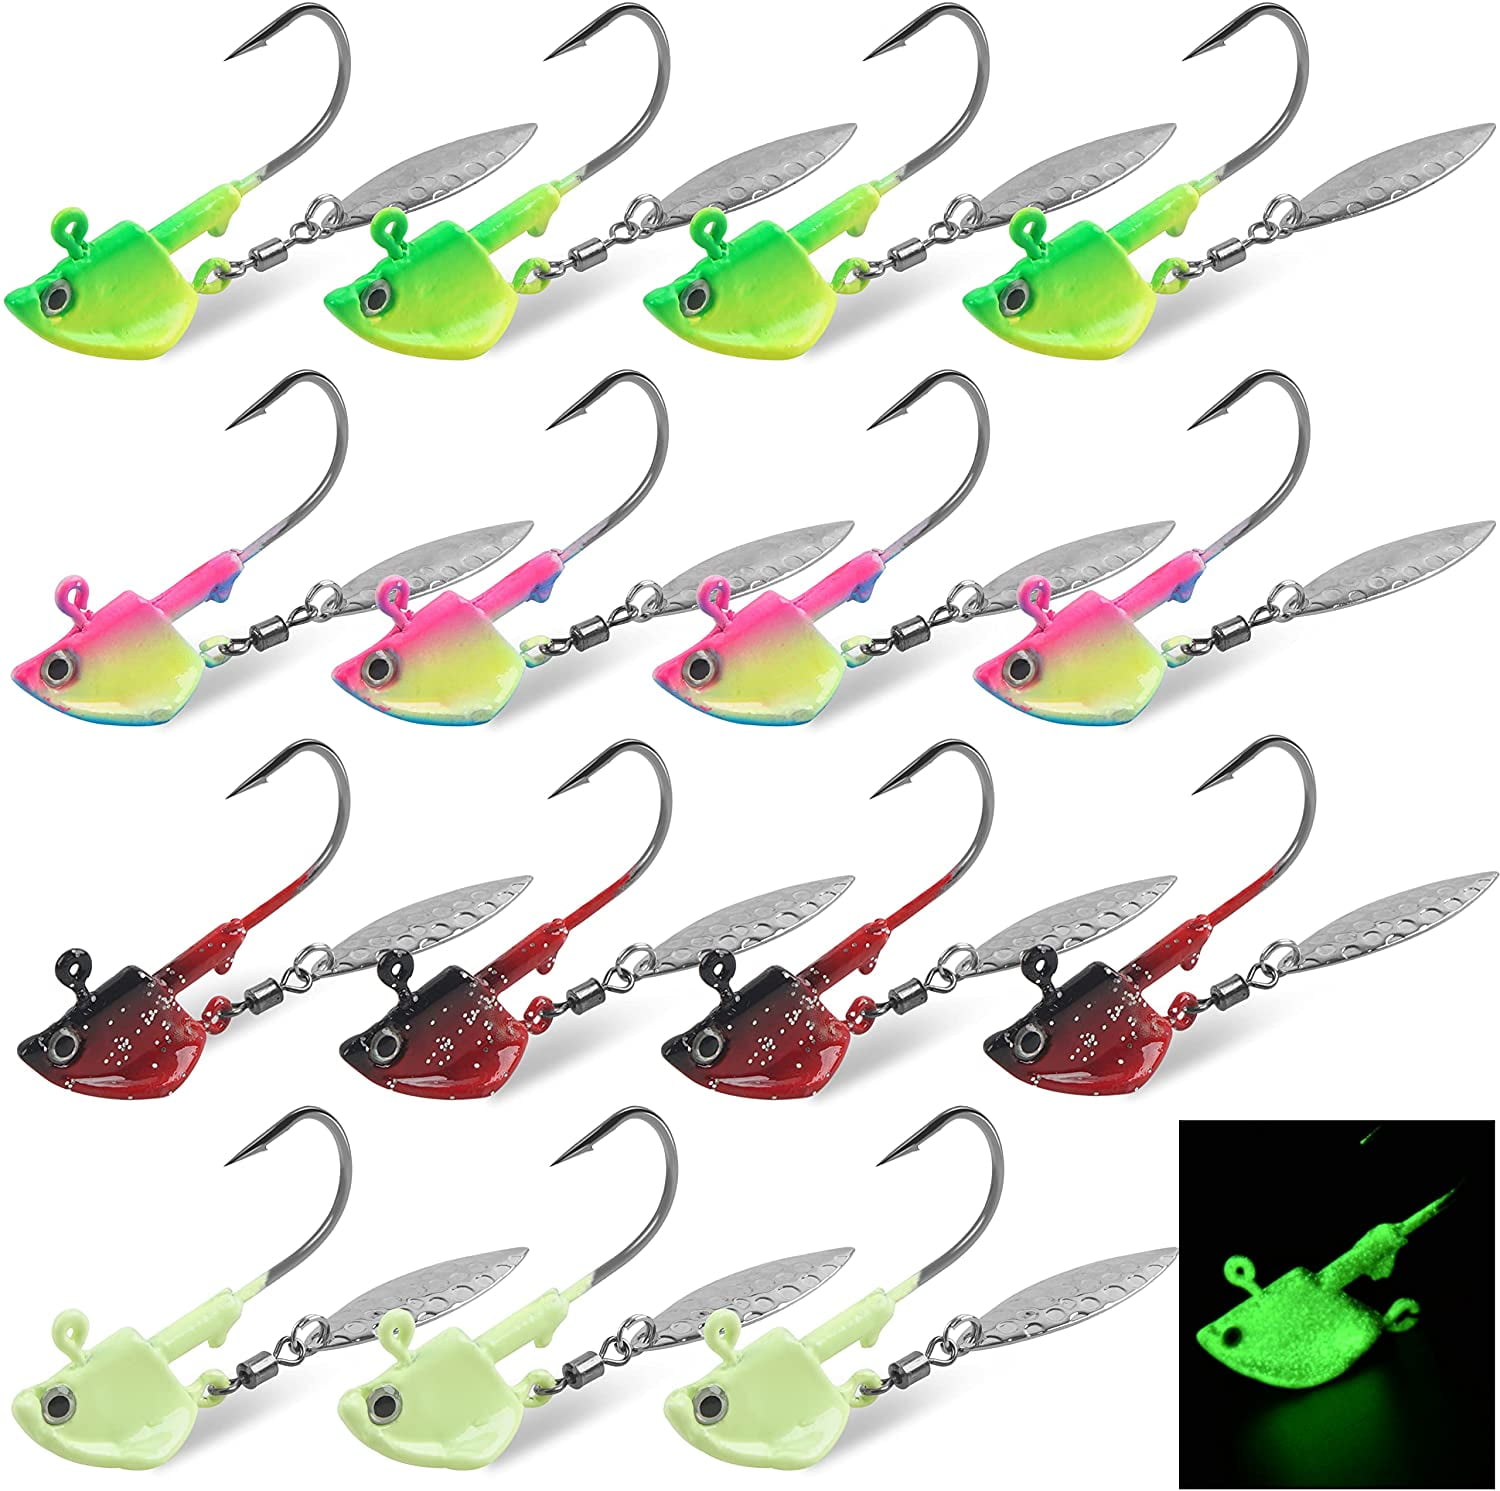 Dovesun Fishing Jig Heads Underspin Jig Heads with Willow Blade Green/Colorful/Red 1/8oz 1/4oz 3/8oz 1/2oz 10pcs